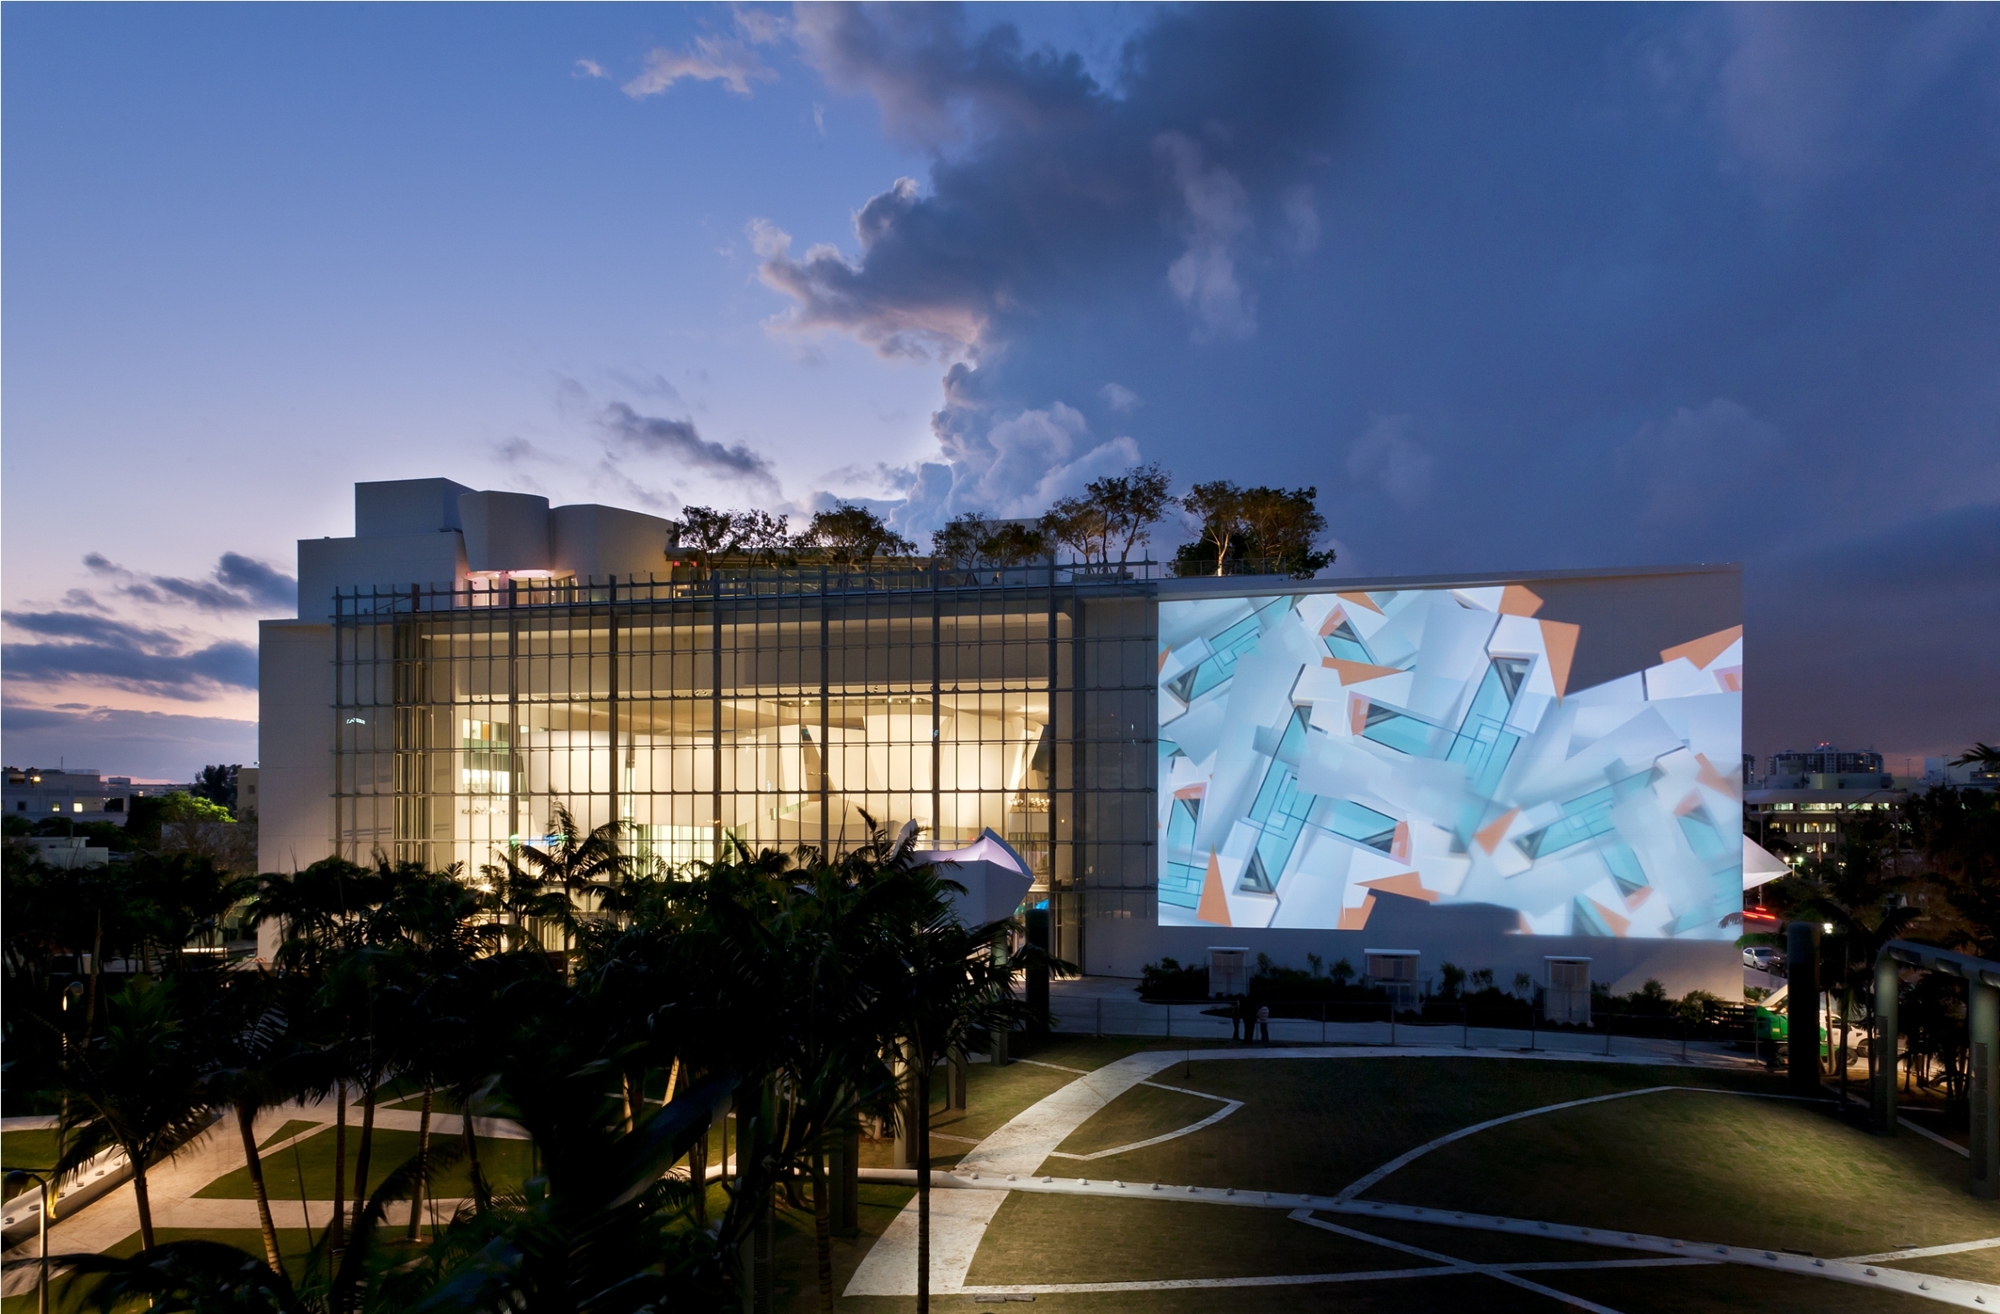 The New World Symphony in Miami Beach includes a 7,000-square-foot projection wall that displays concerts and other videos for members of the public in a 2.5-acre park. That amenity caught the eye of Vice Mayor Susan Chapman, who has suggested that Saraso